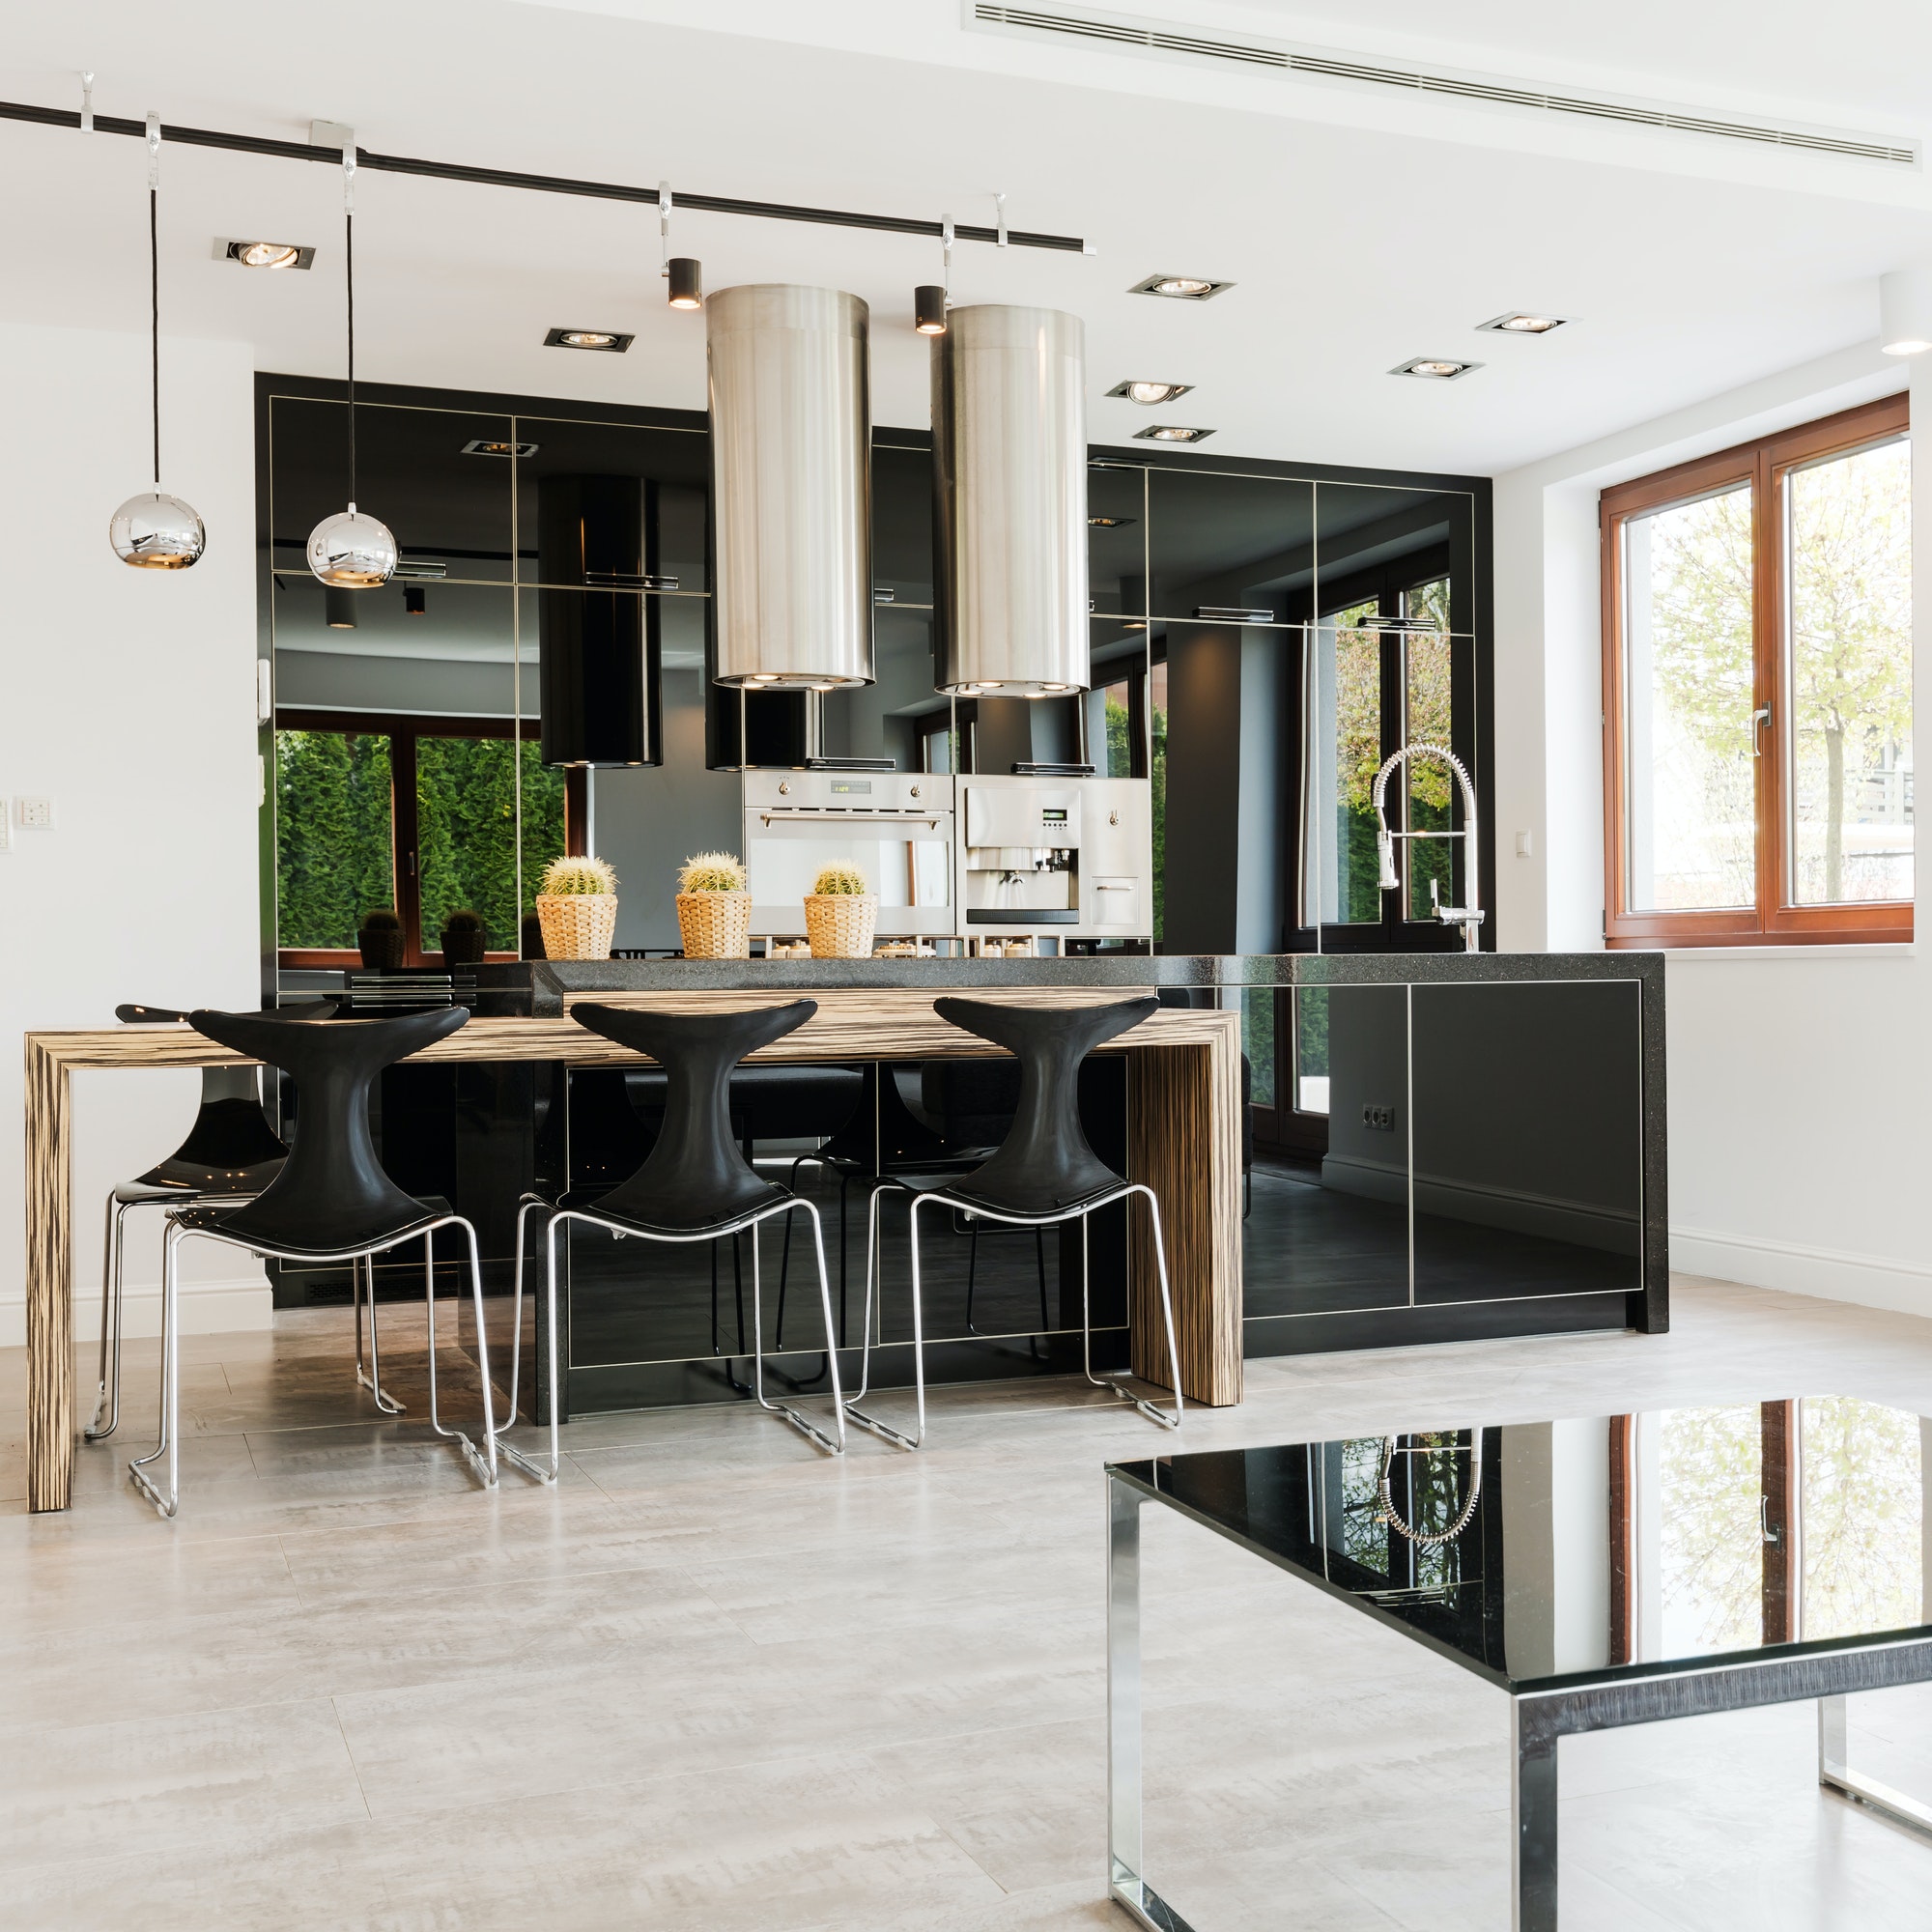 Open kitchen with high-gloss cabinets